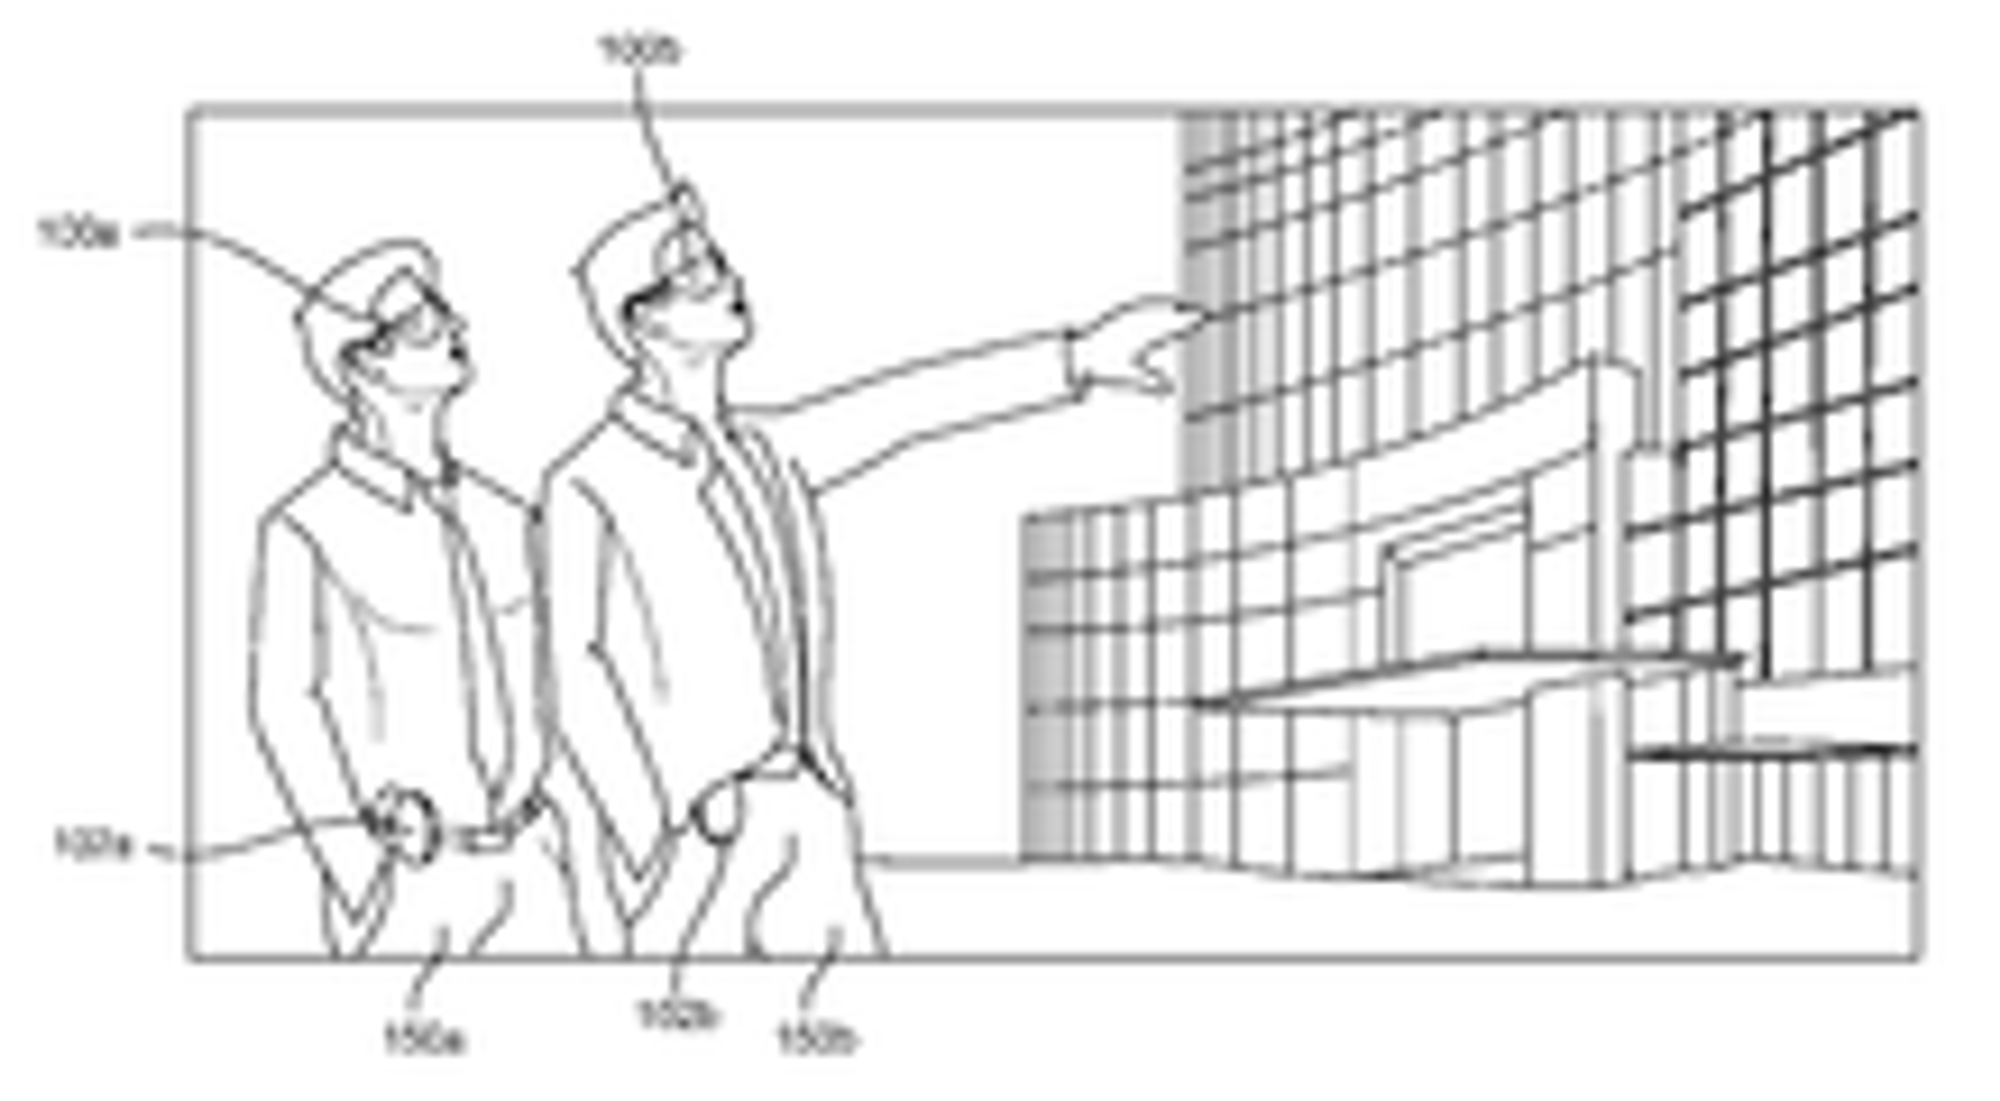 US10115232B2 - Using a map of the world for augmented or virtual reality systems - Google Patents